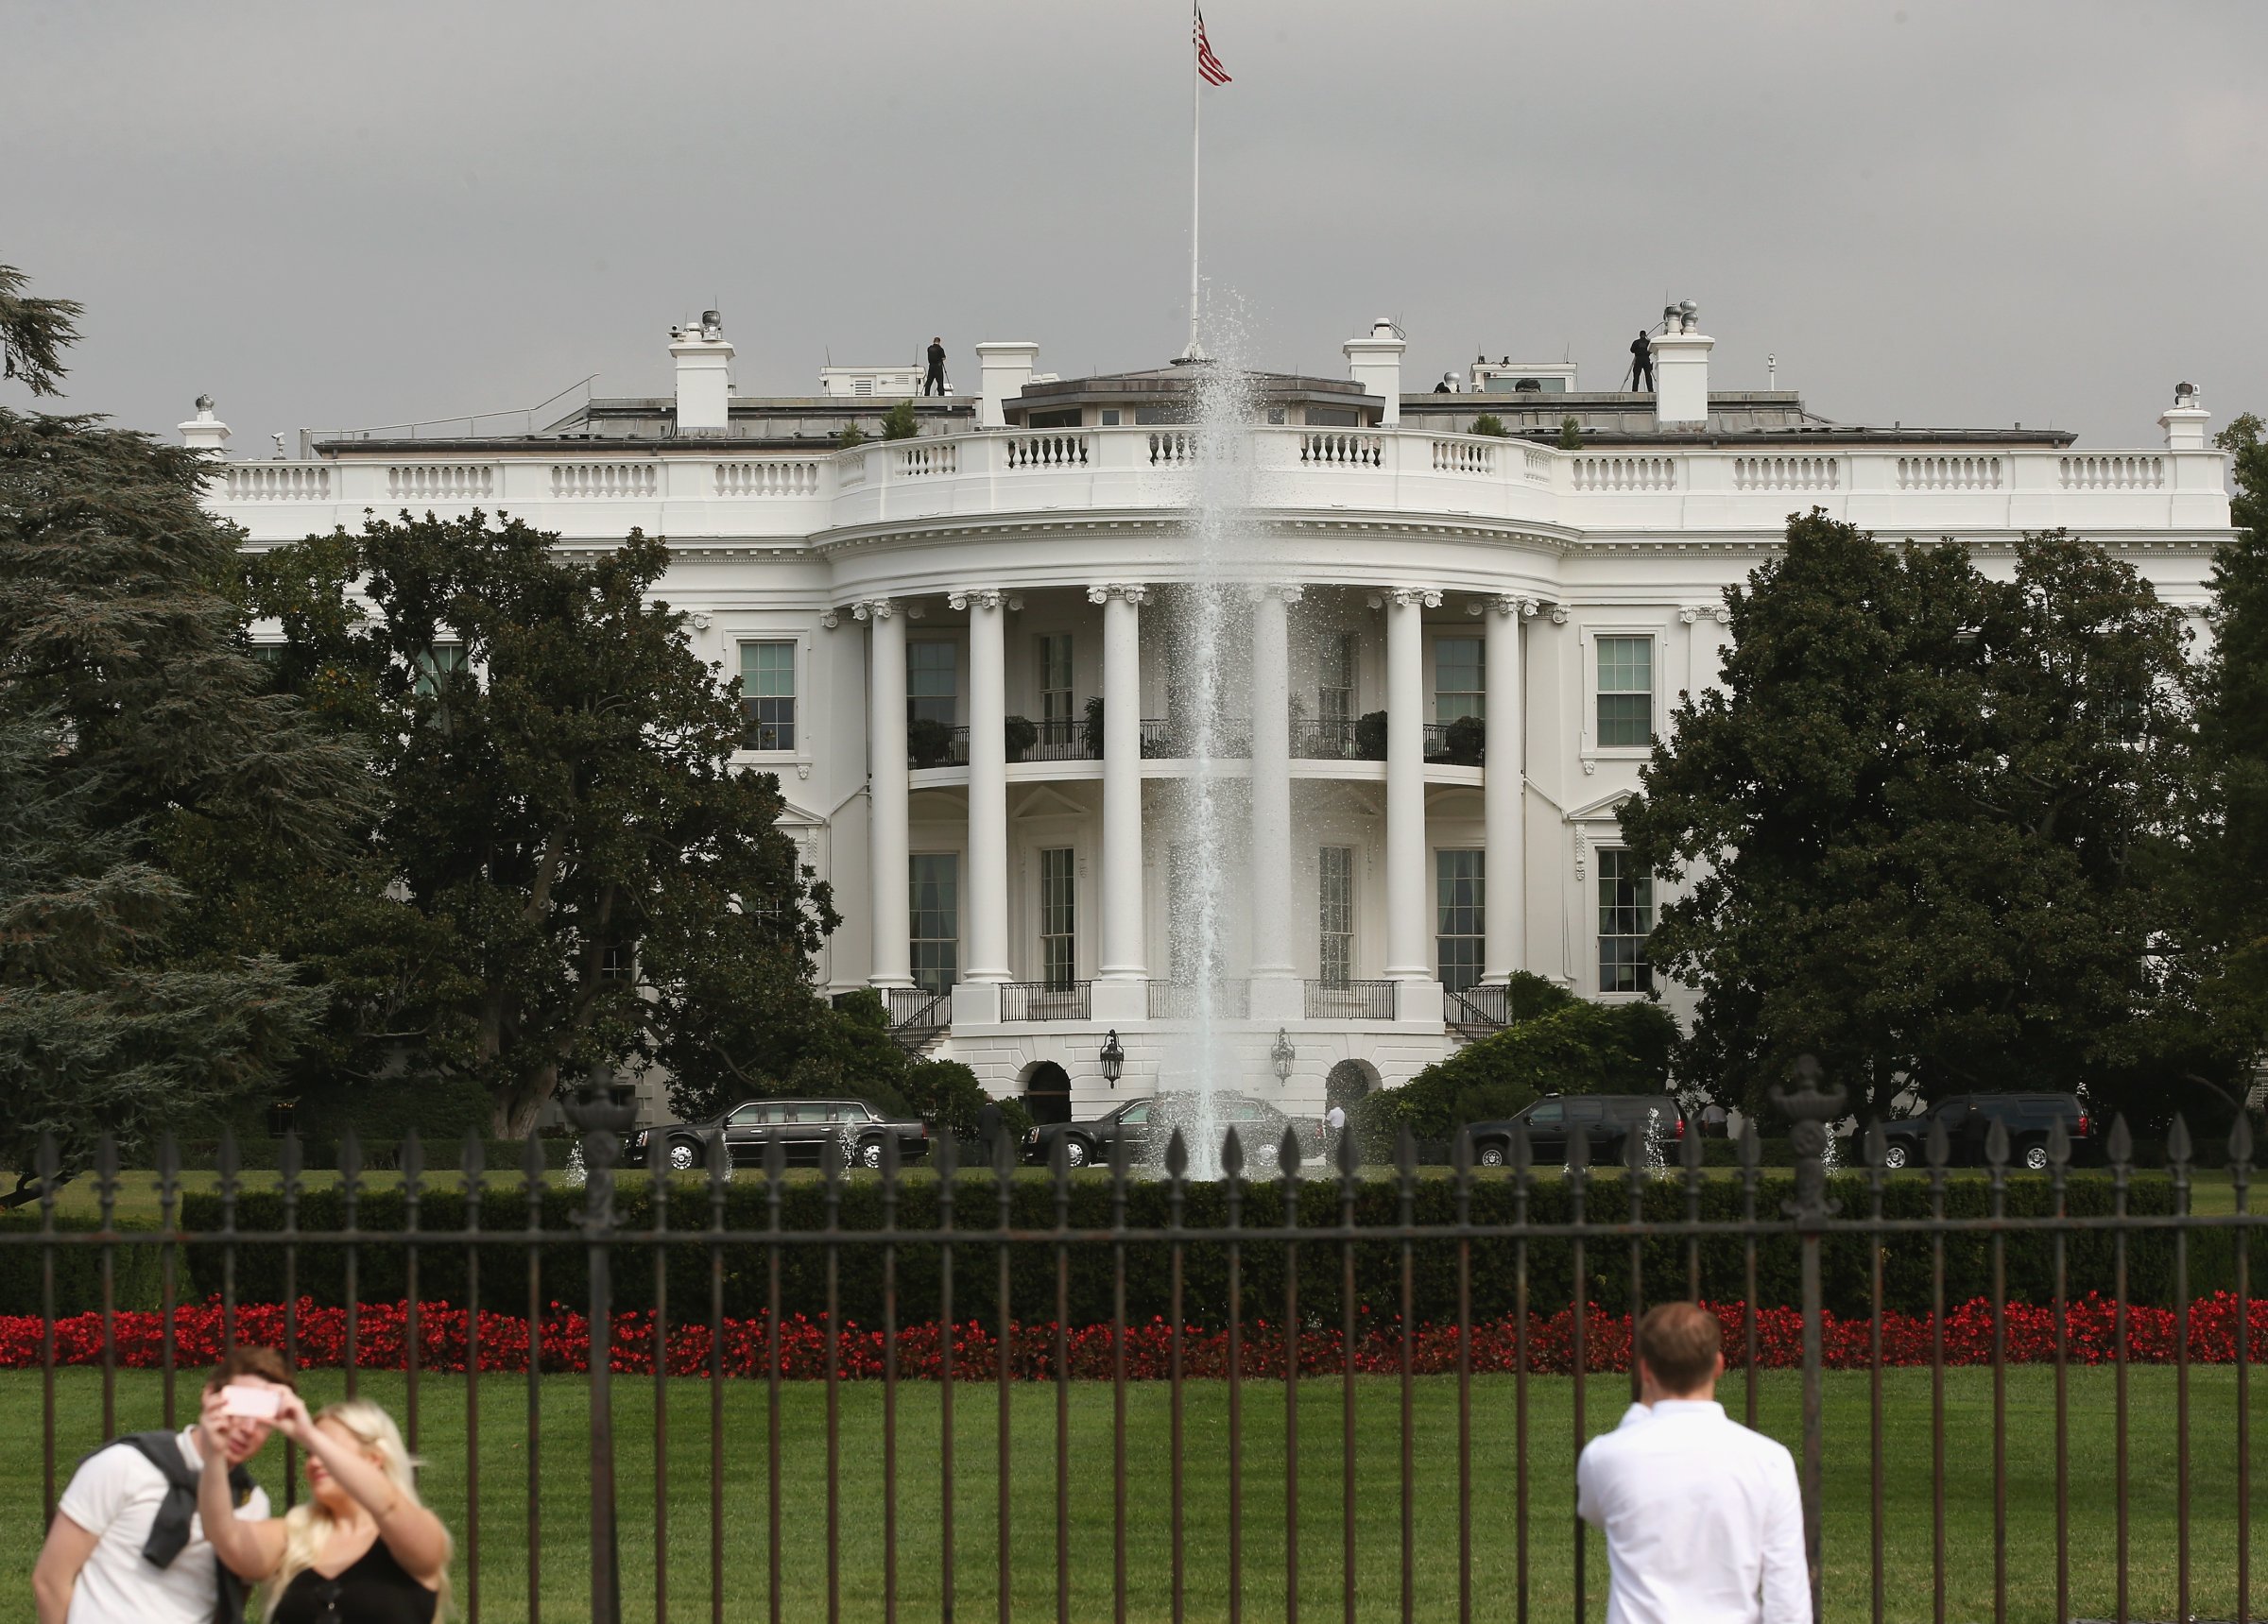 Tourists visit the south side of the White House on Sept. 30, 2014 in Washington.